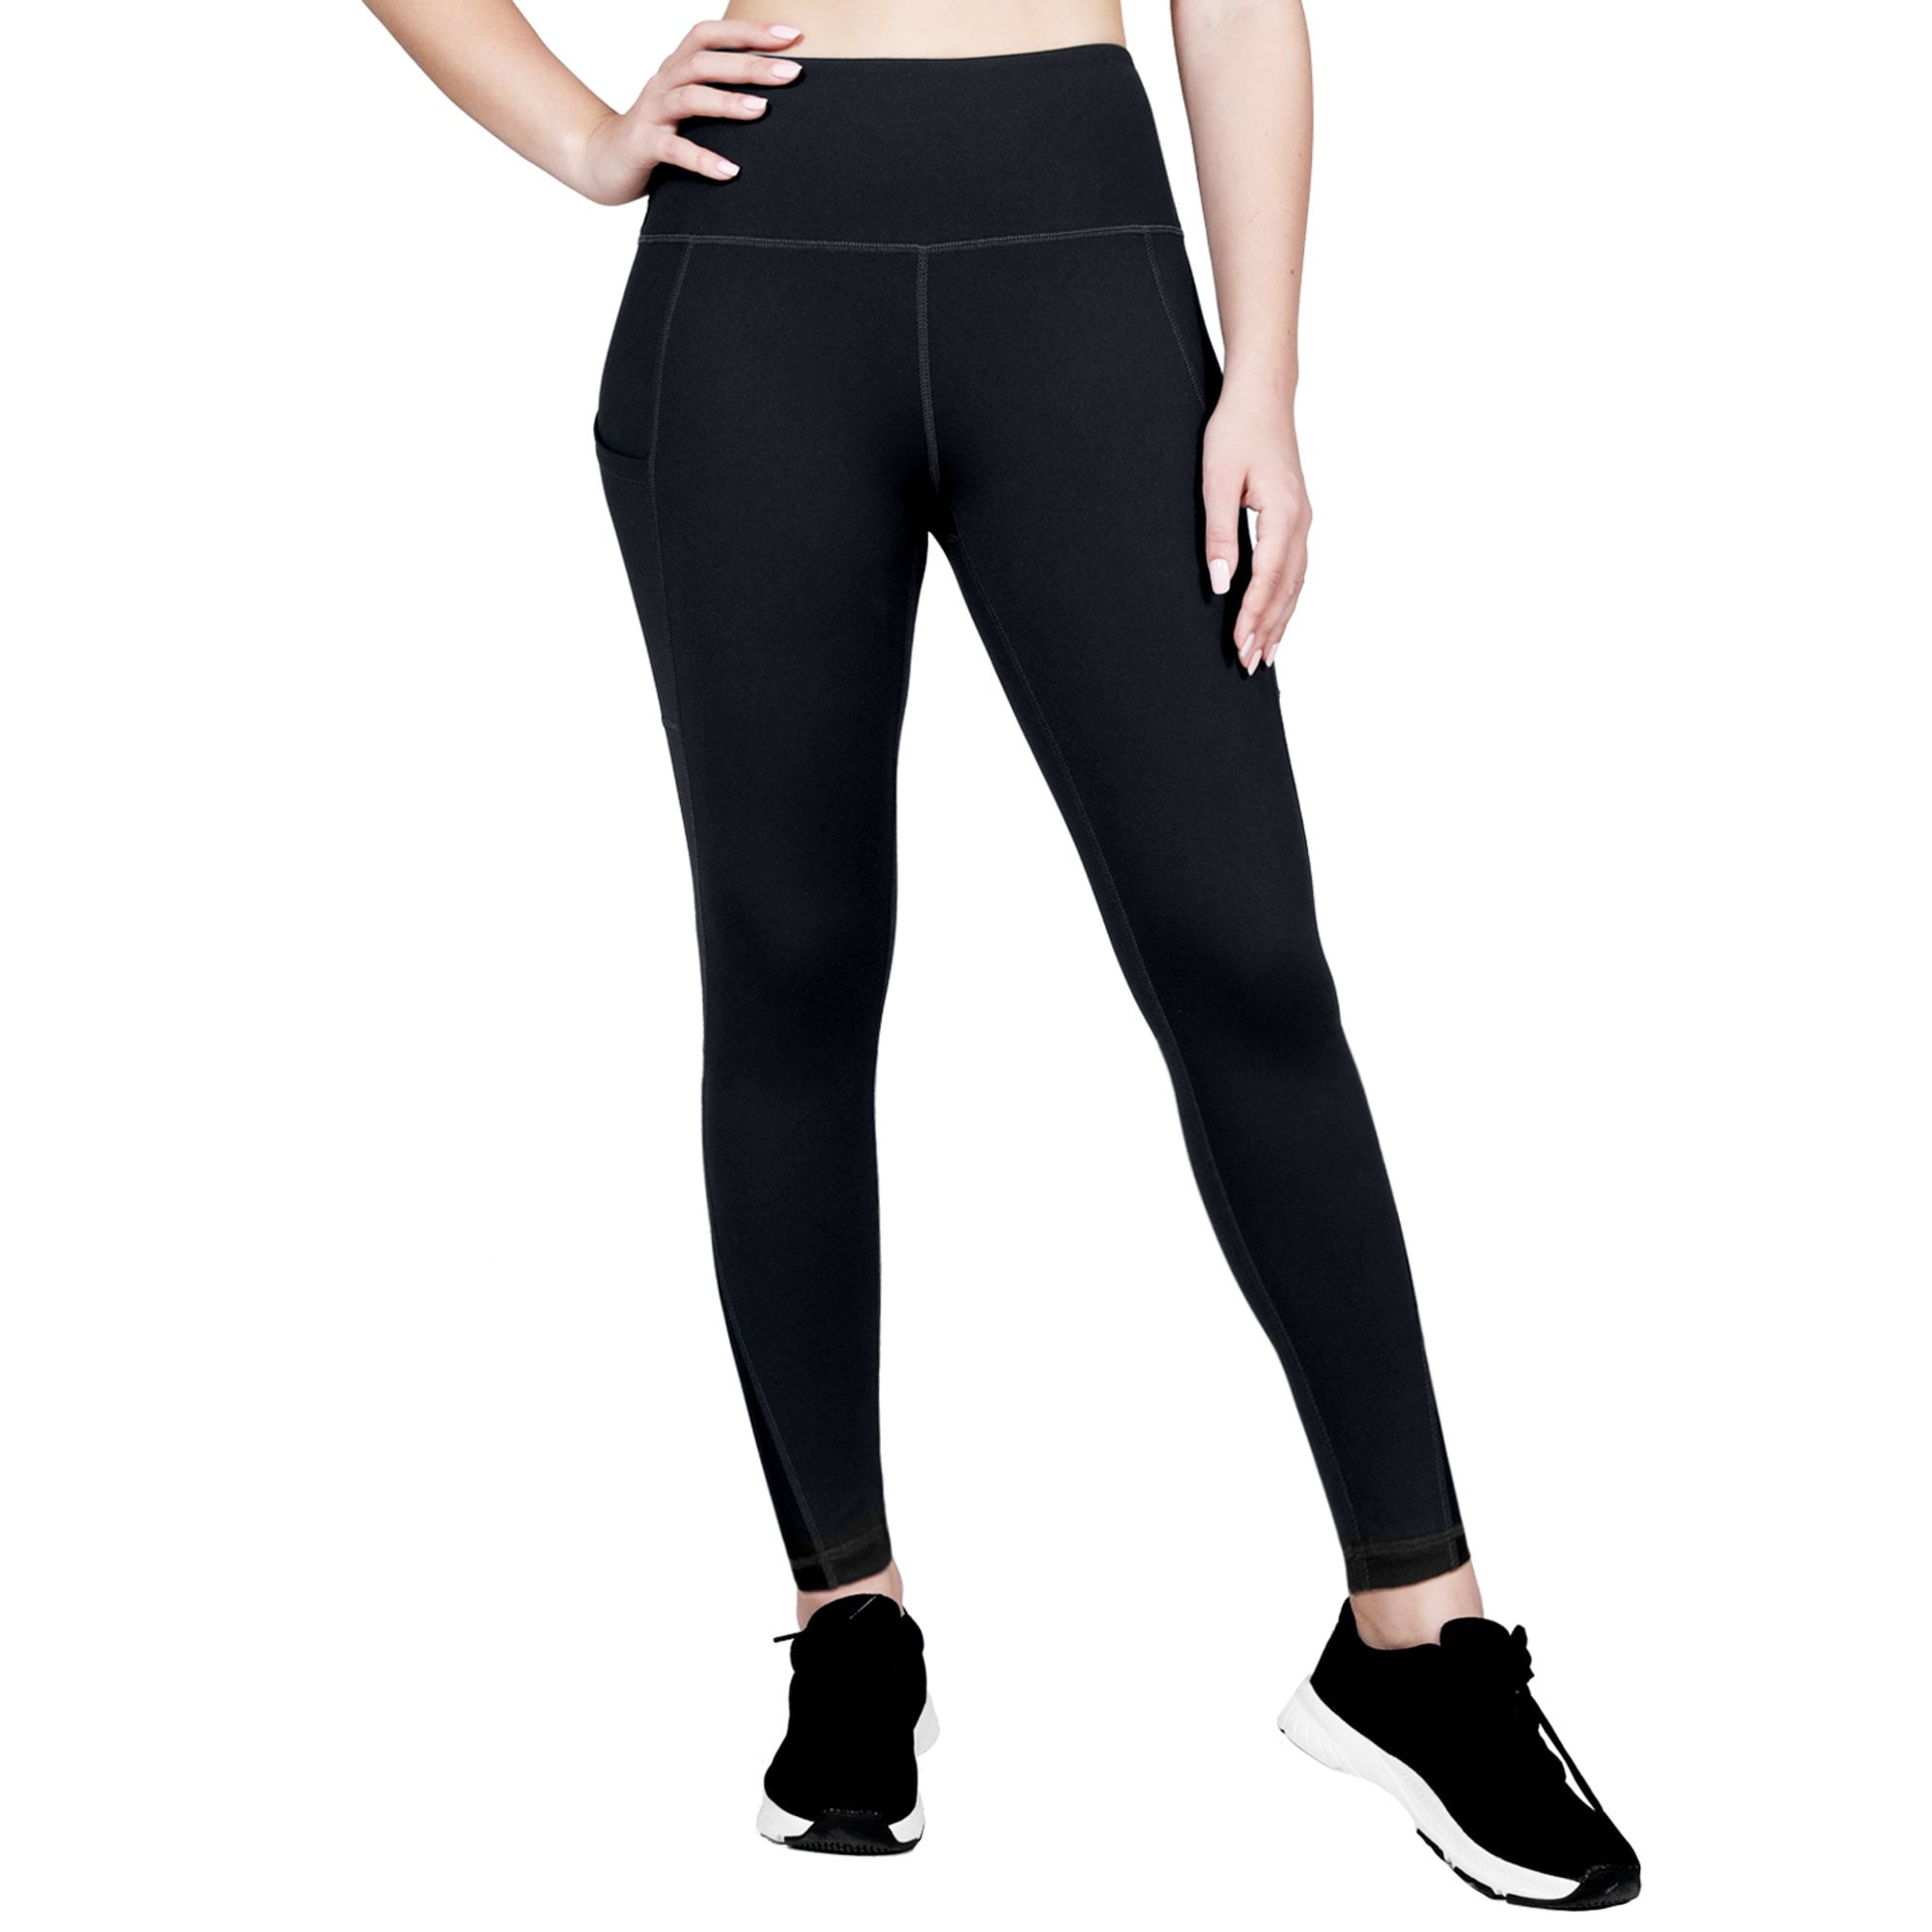 Cosmonic High Waisted Yoga Pants with Pockets - Tummy Control, Squat-Proof  Workout Pants for Women, Adult, 4 Way Stretch 7/8 Length Yoga Leggings Size  M - Walmart.com